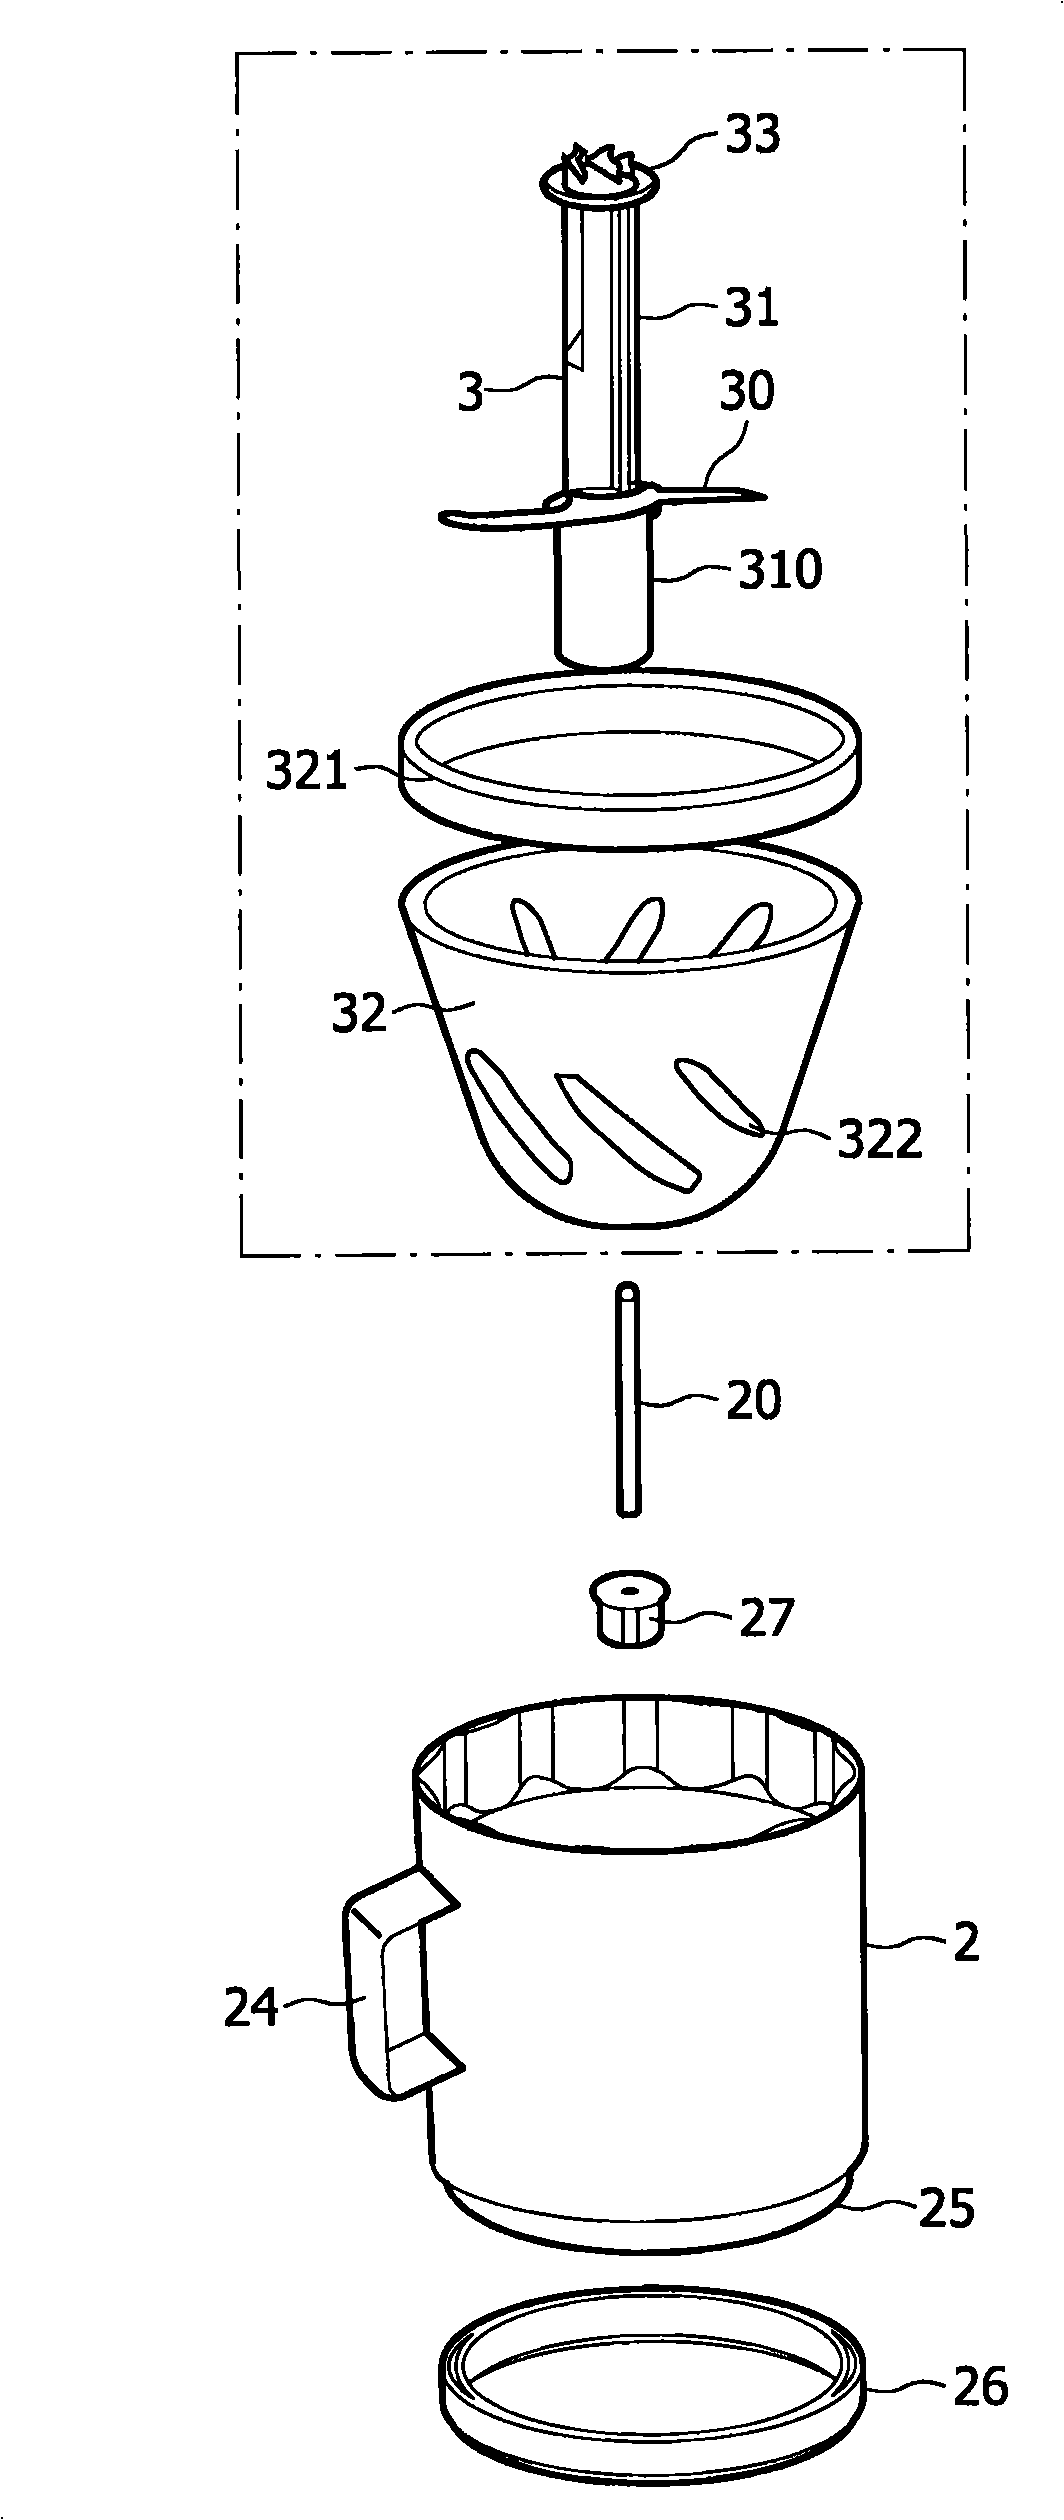 Device for chopping food, in particular pieces of ice